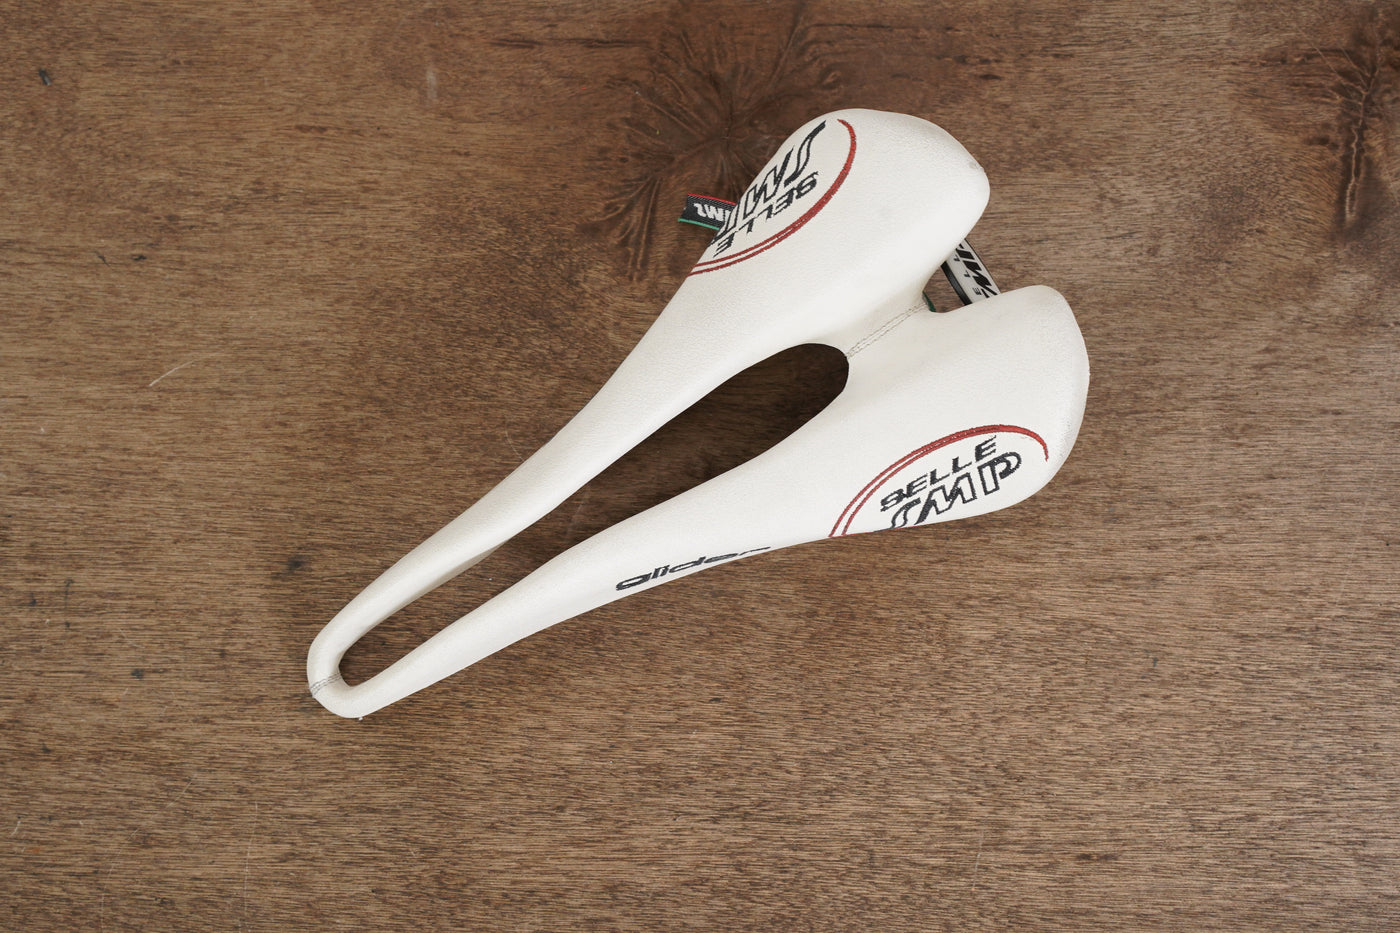 136mm Selle SMP Glider Stainless Steel Rail Road Saddle 267g